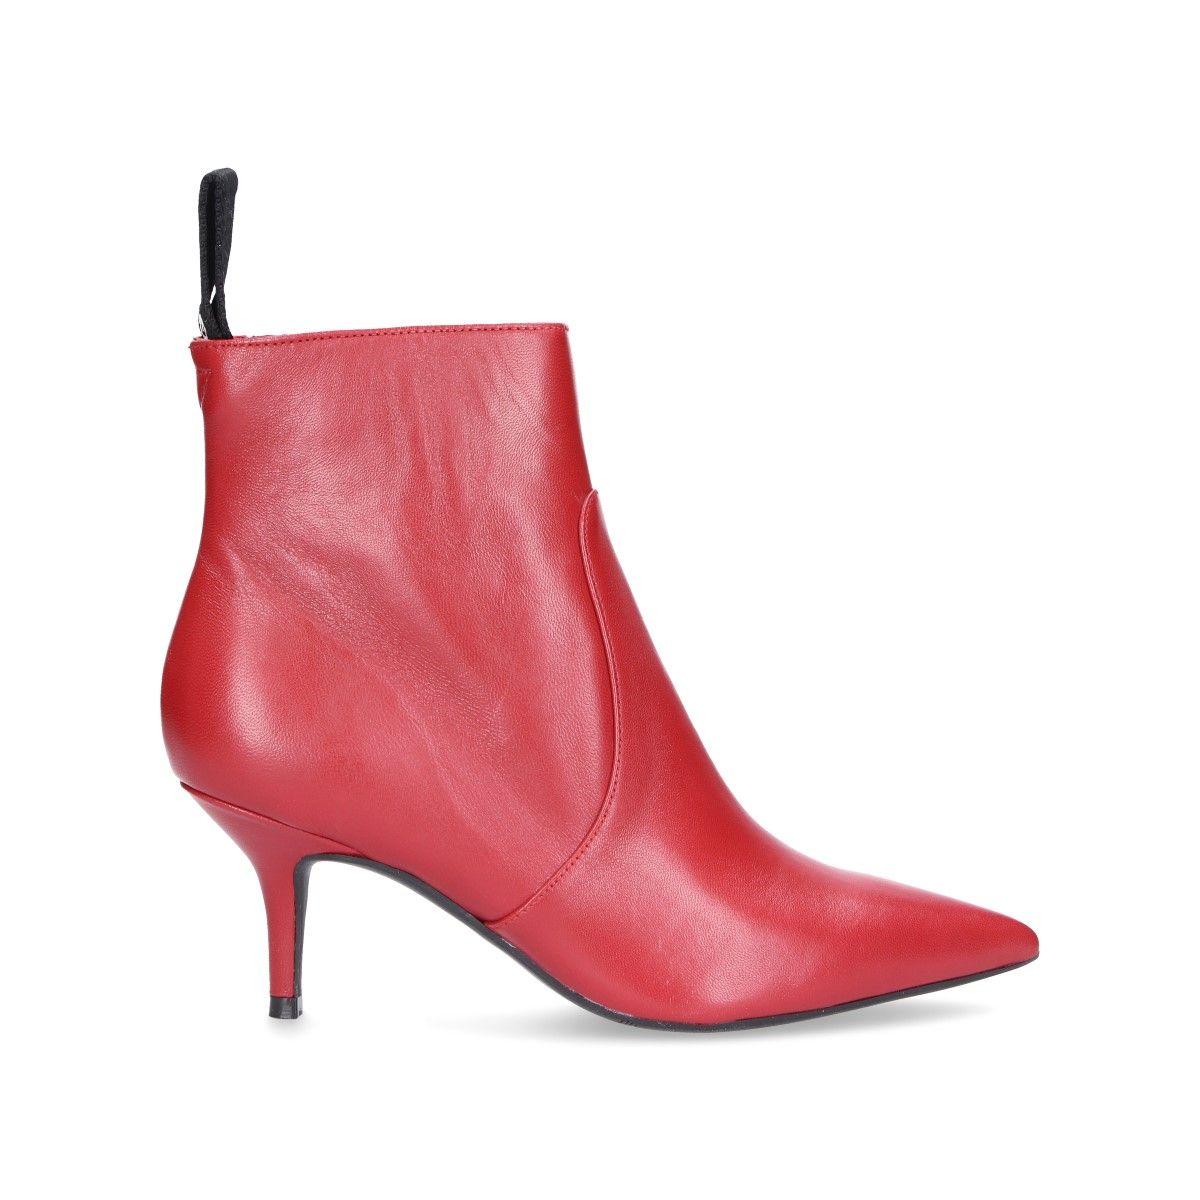 Guess Red Leather Ankle Boots - Lyst